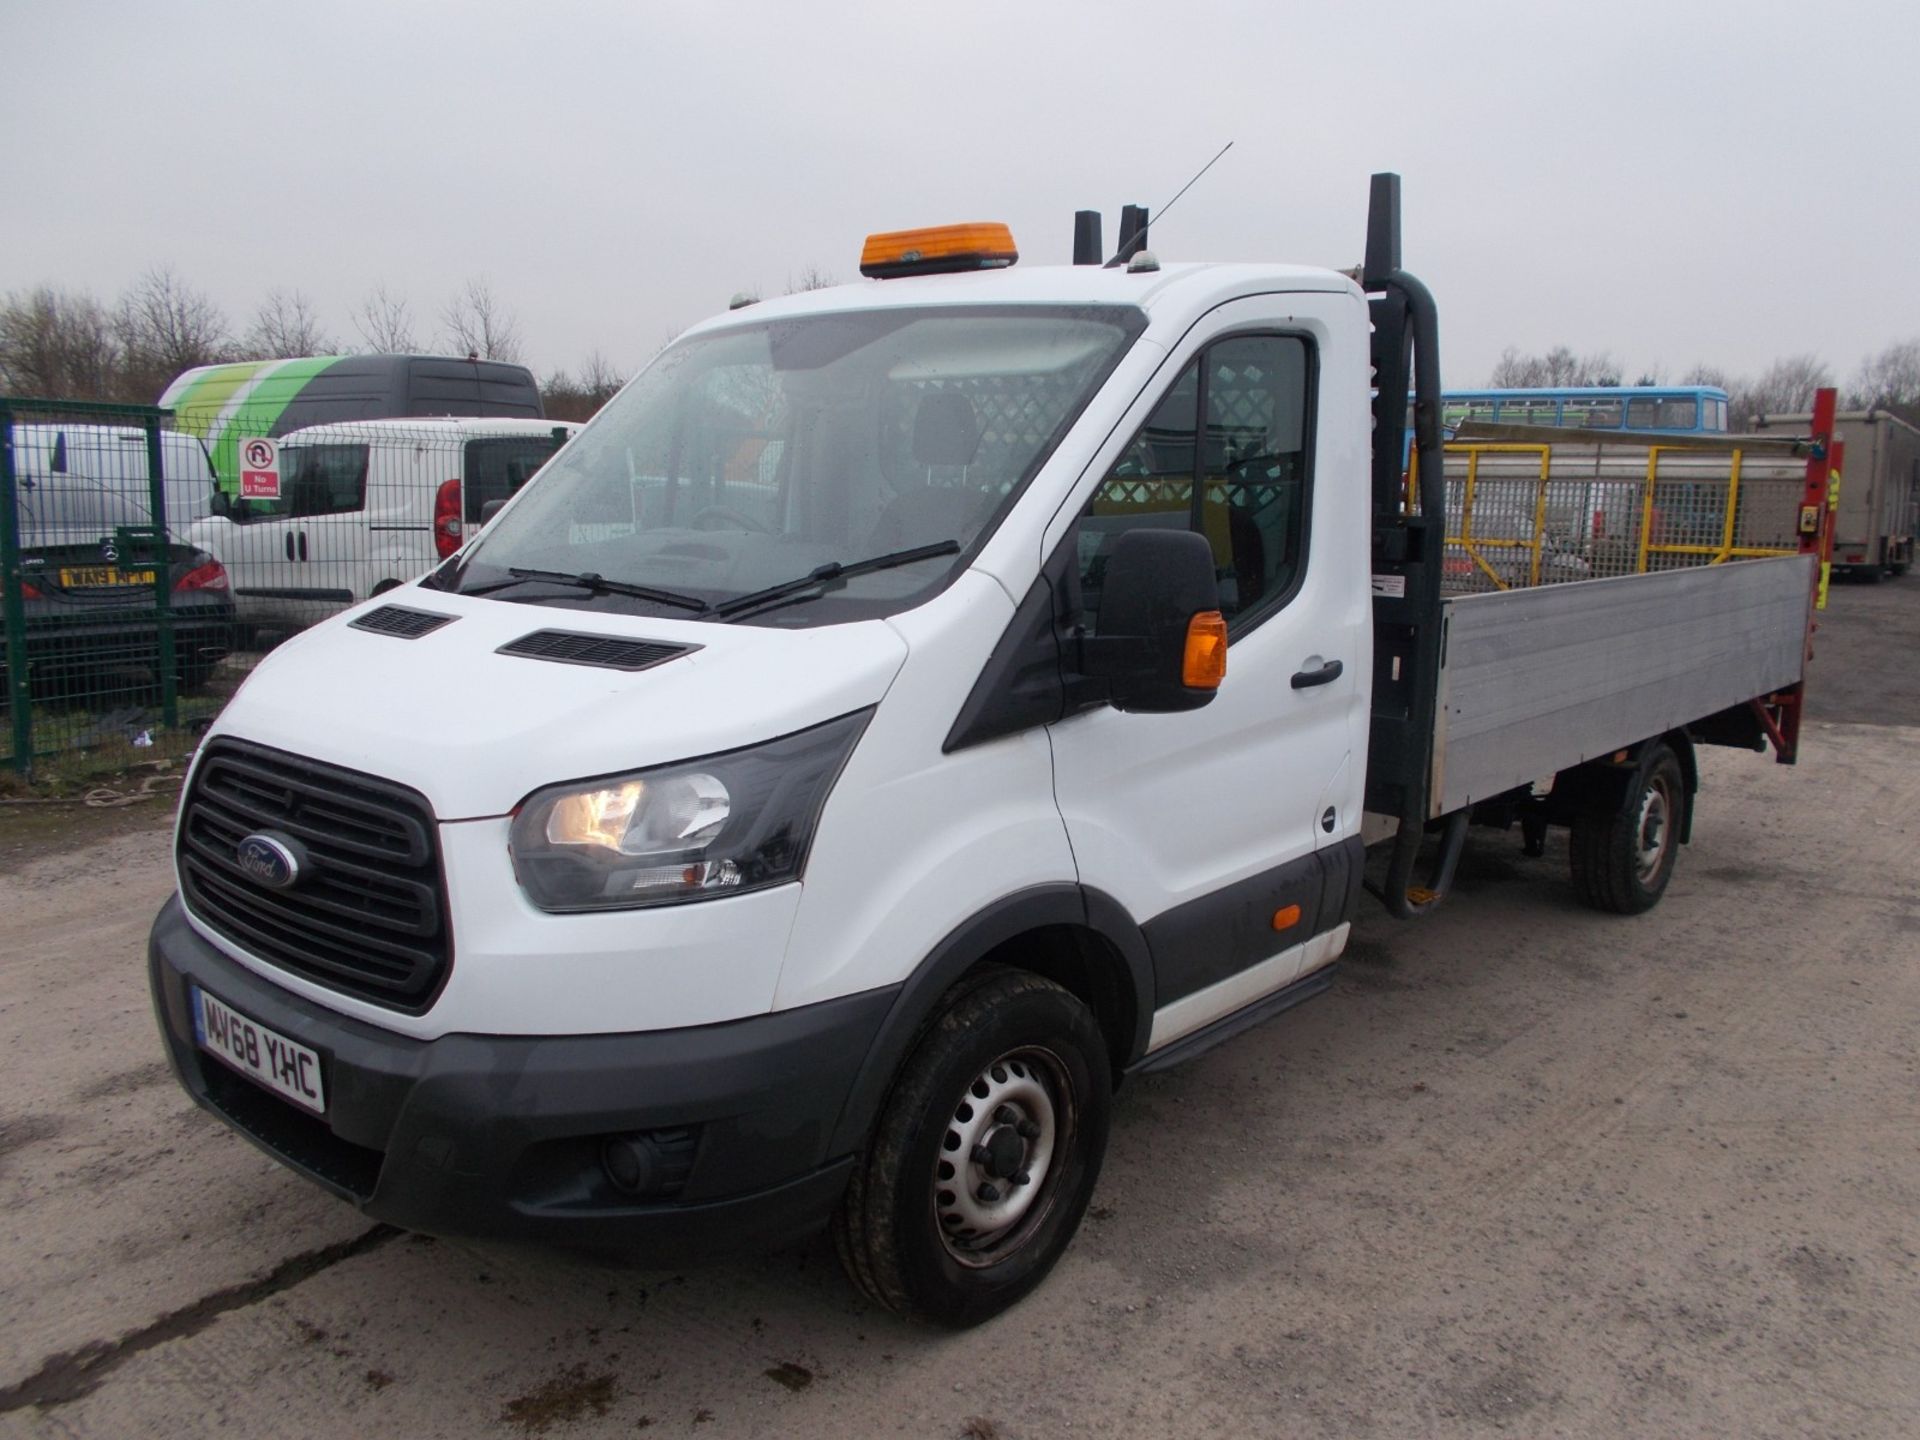 2018/68 FORD TRANSIT 350 DROPSIDE LORRY, 2.0 DIESEL, 6 SPEED MANUAL, 59K MILES, STARTS RUNS DRIVES - Image 3 of 24